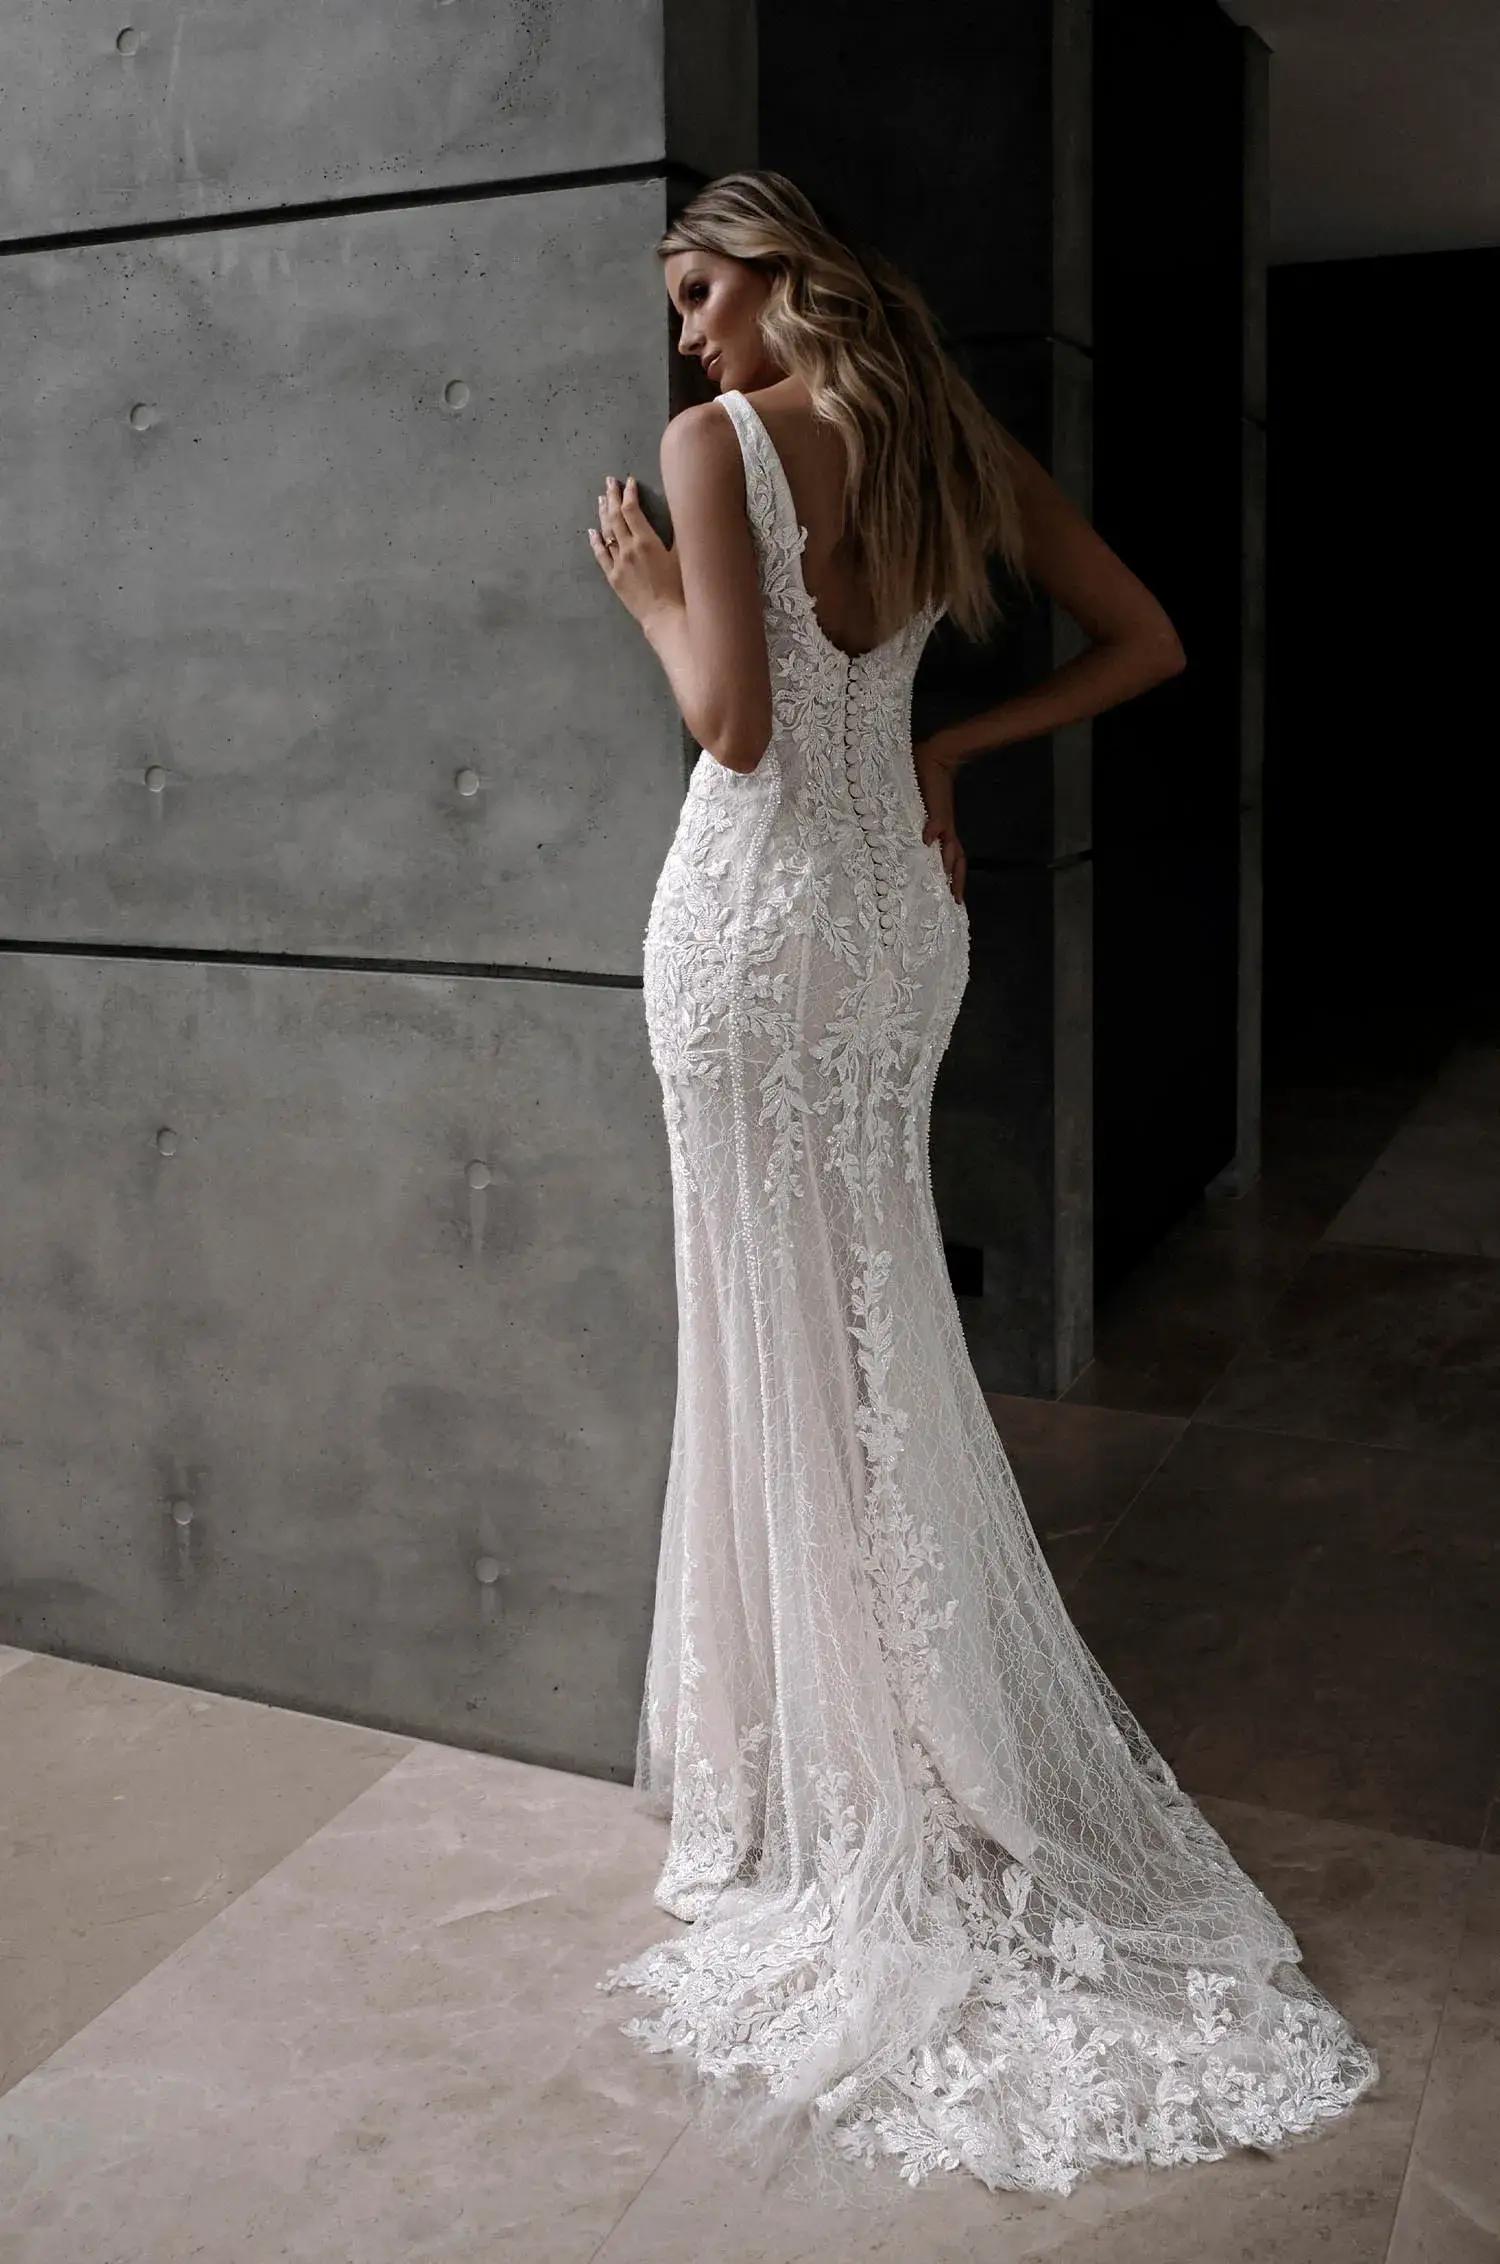 Our Favorite Gowns Inspired From the Bridal Market Image